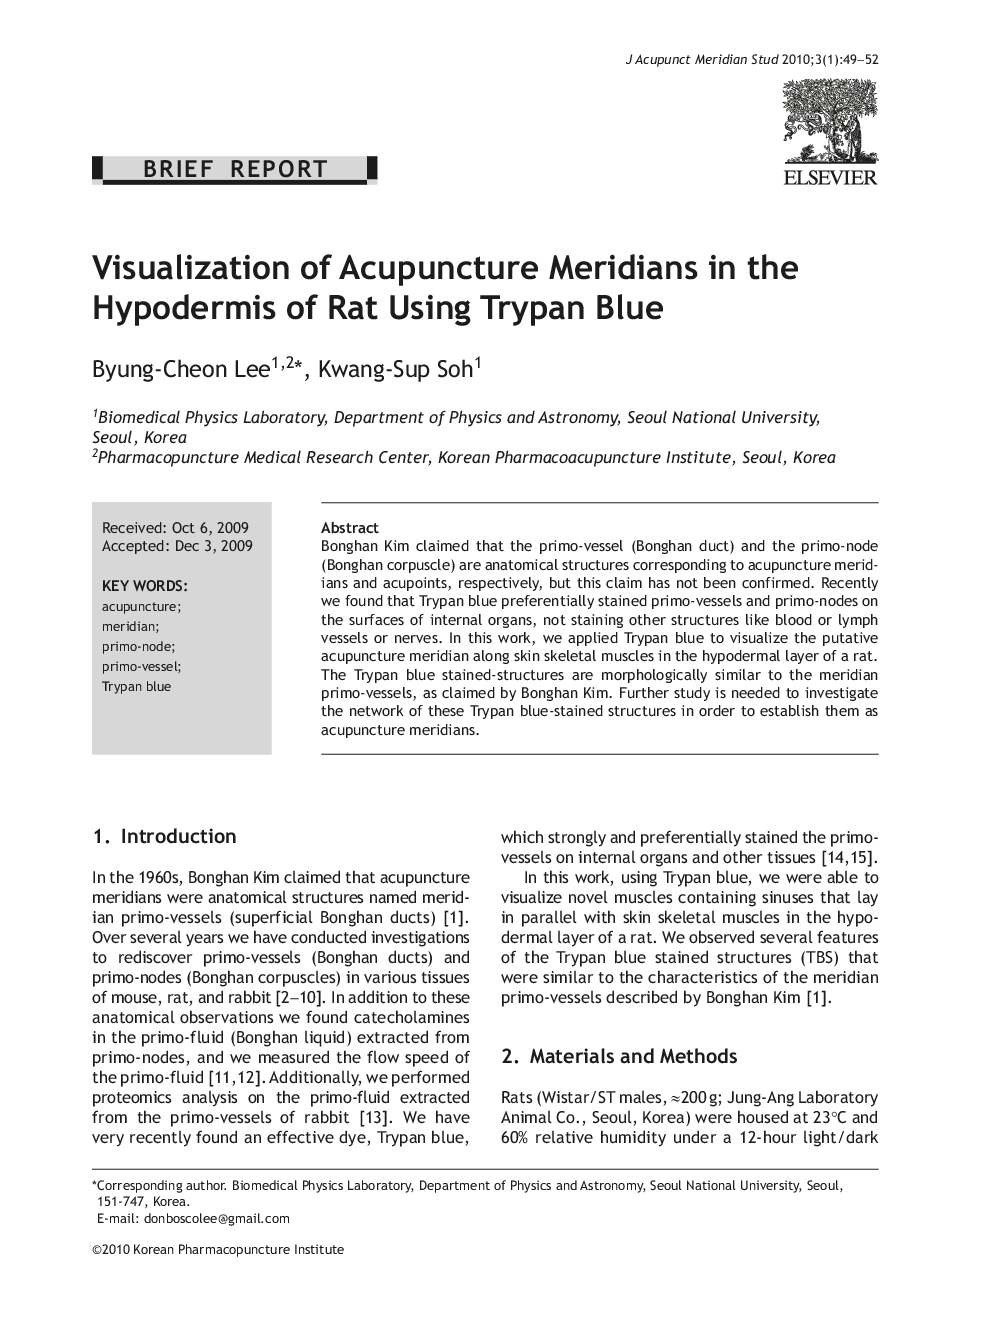 Visualization of Acupuncture Meridians in the Hypodermis of Rat Using Trypan Blue